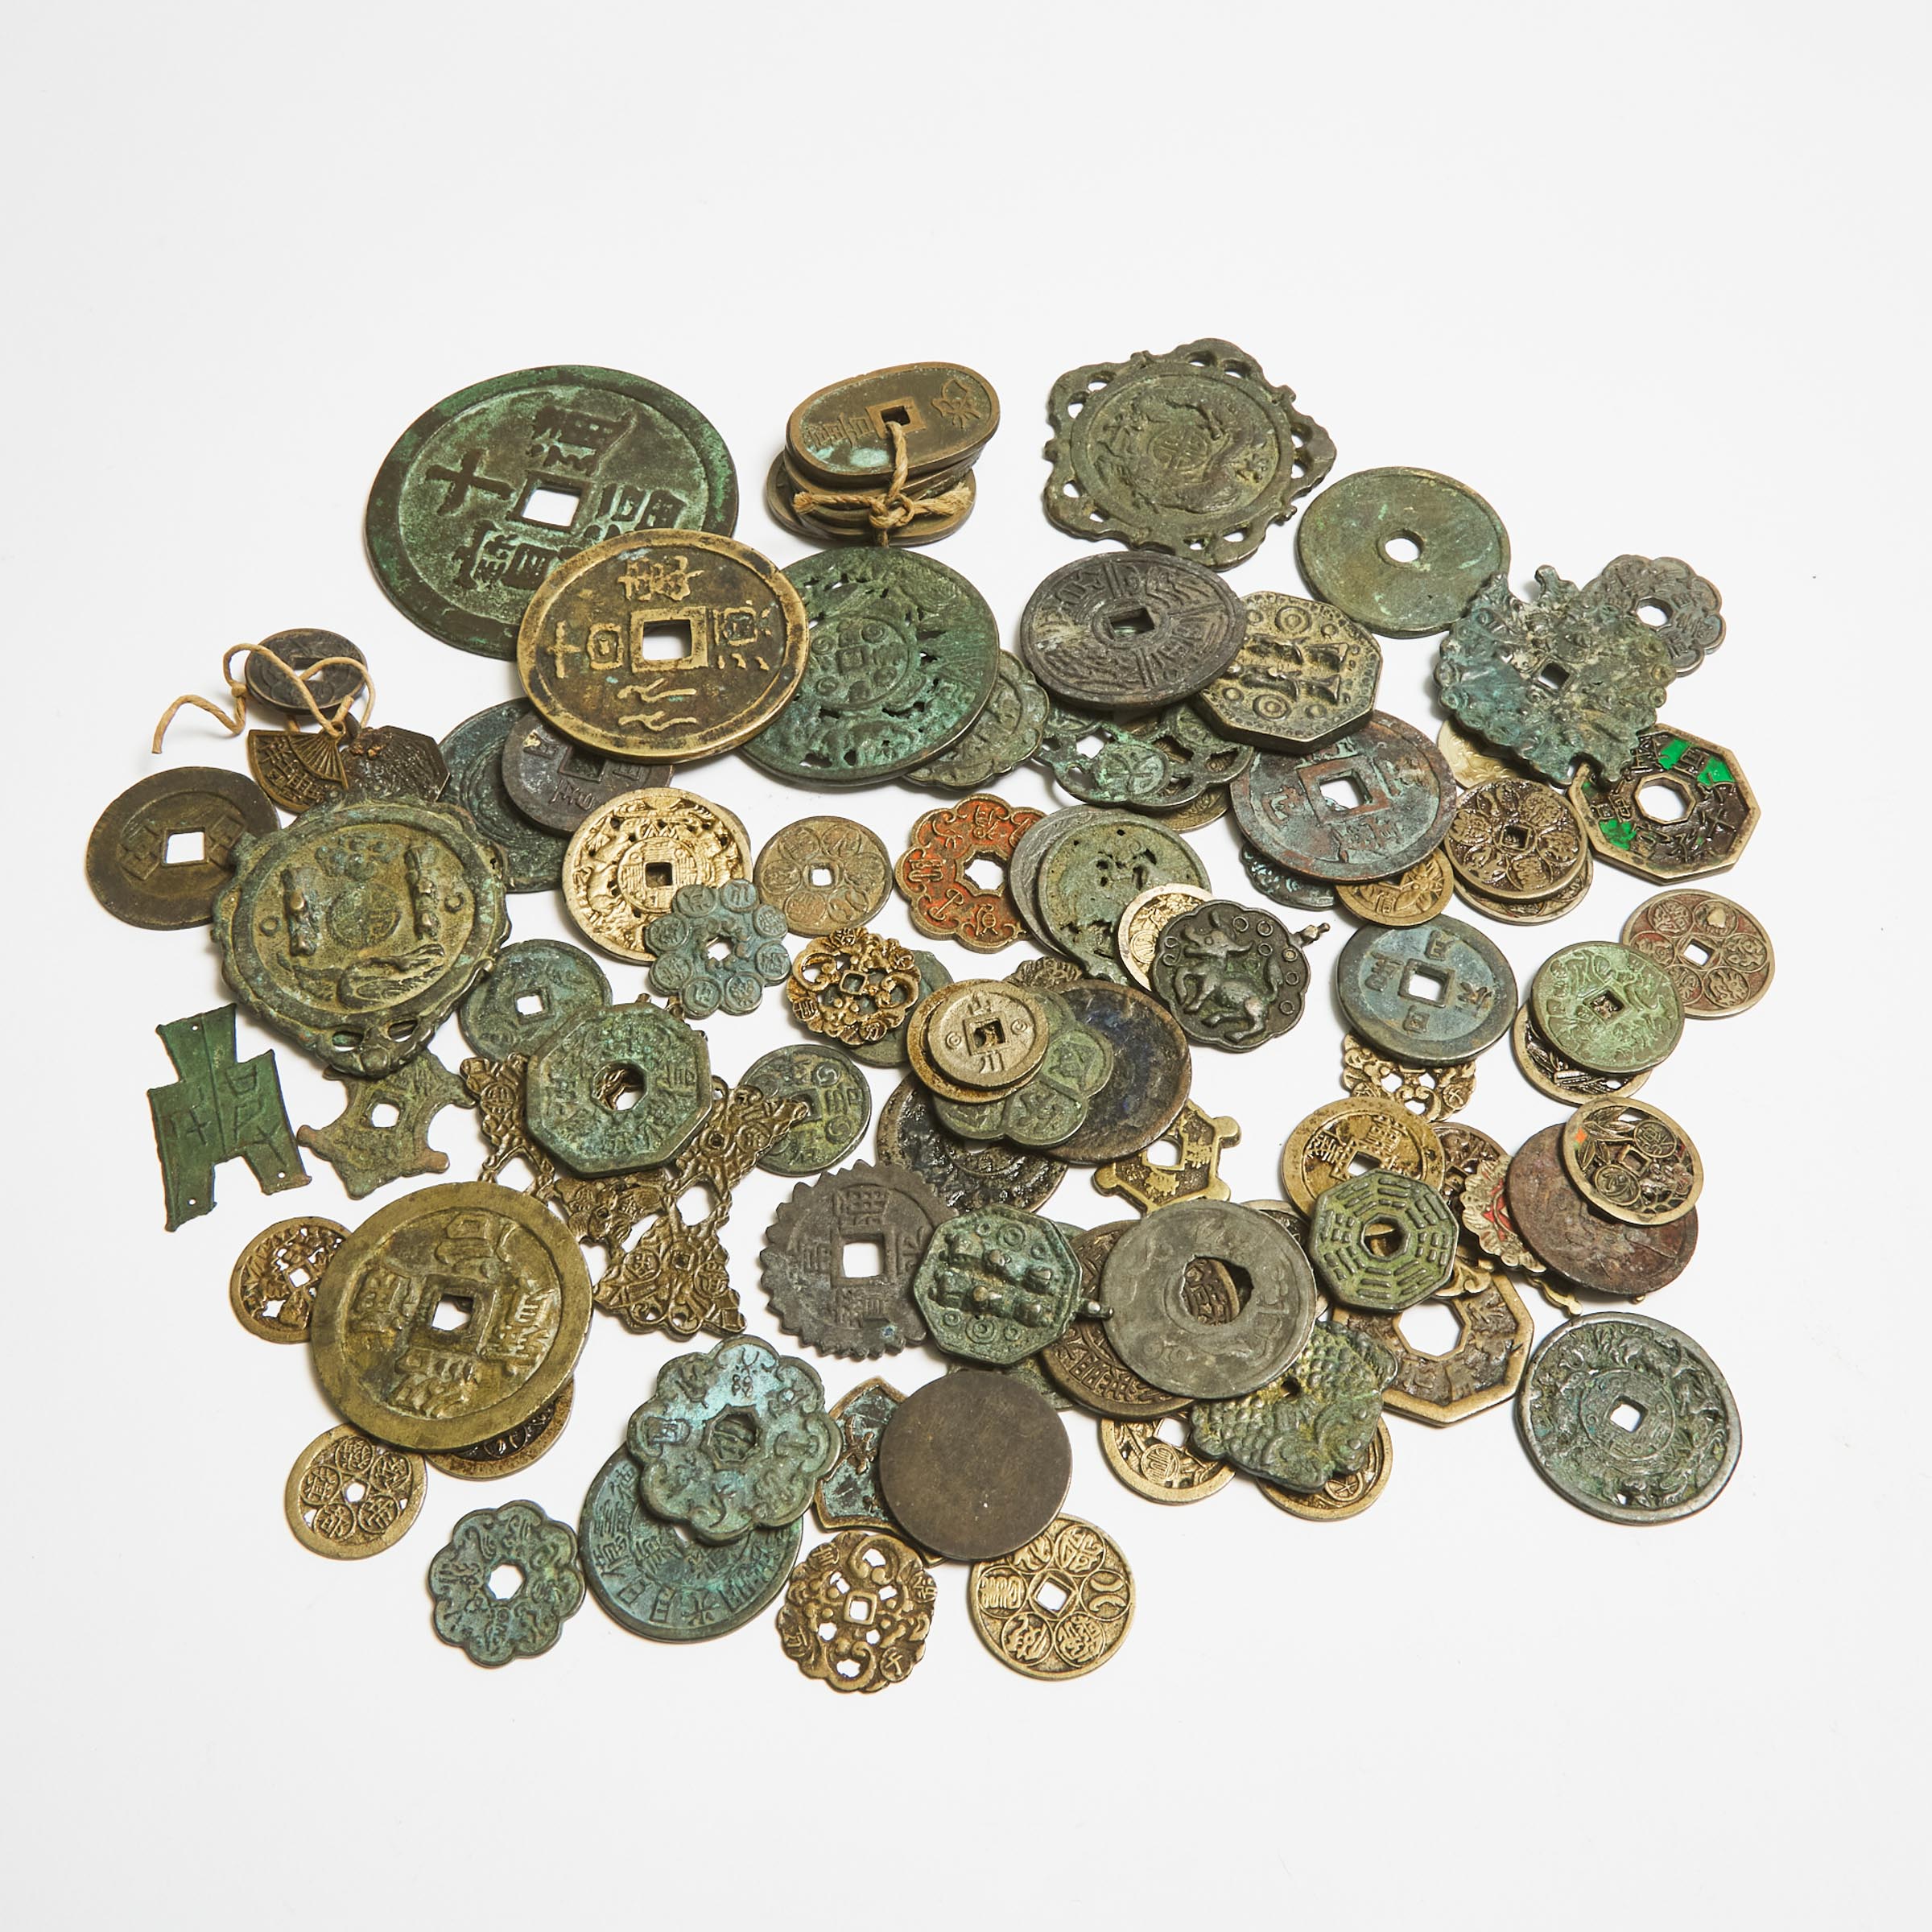 A Group of Ninety-Three Numismatic